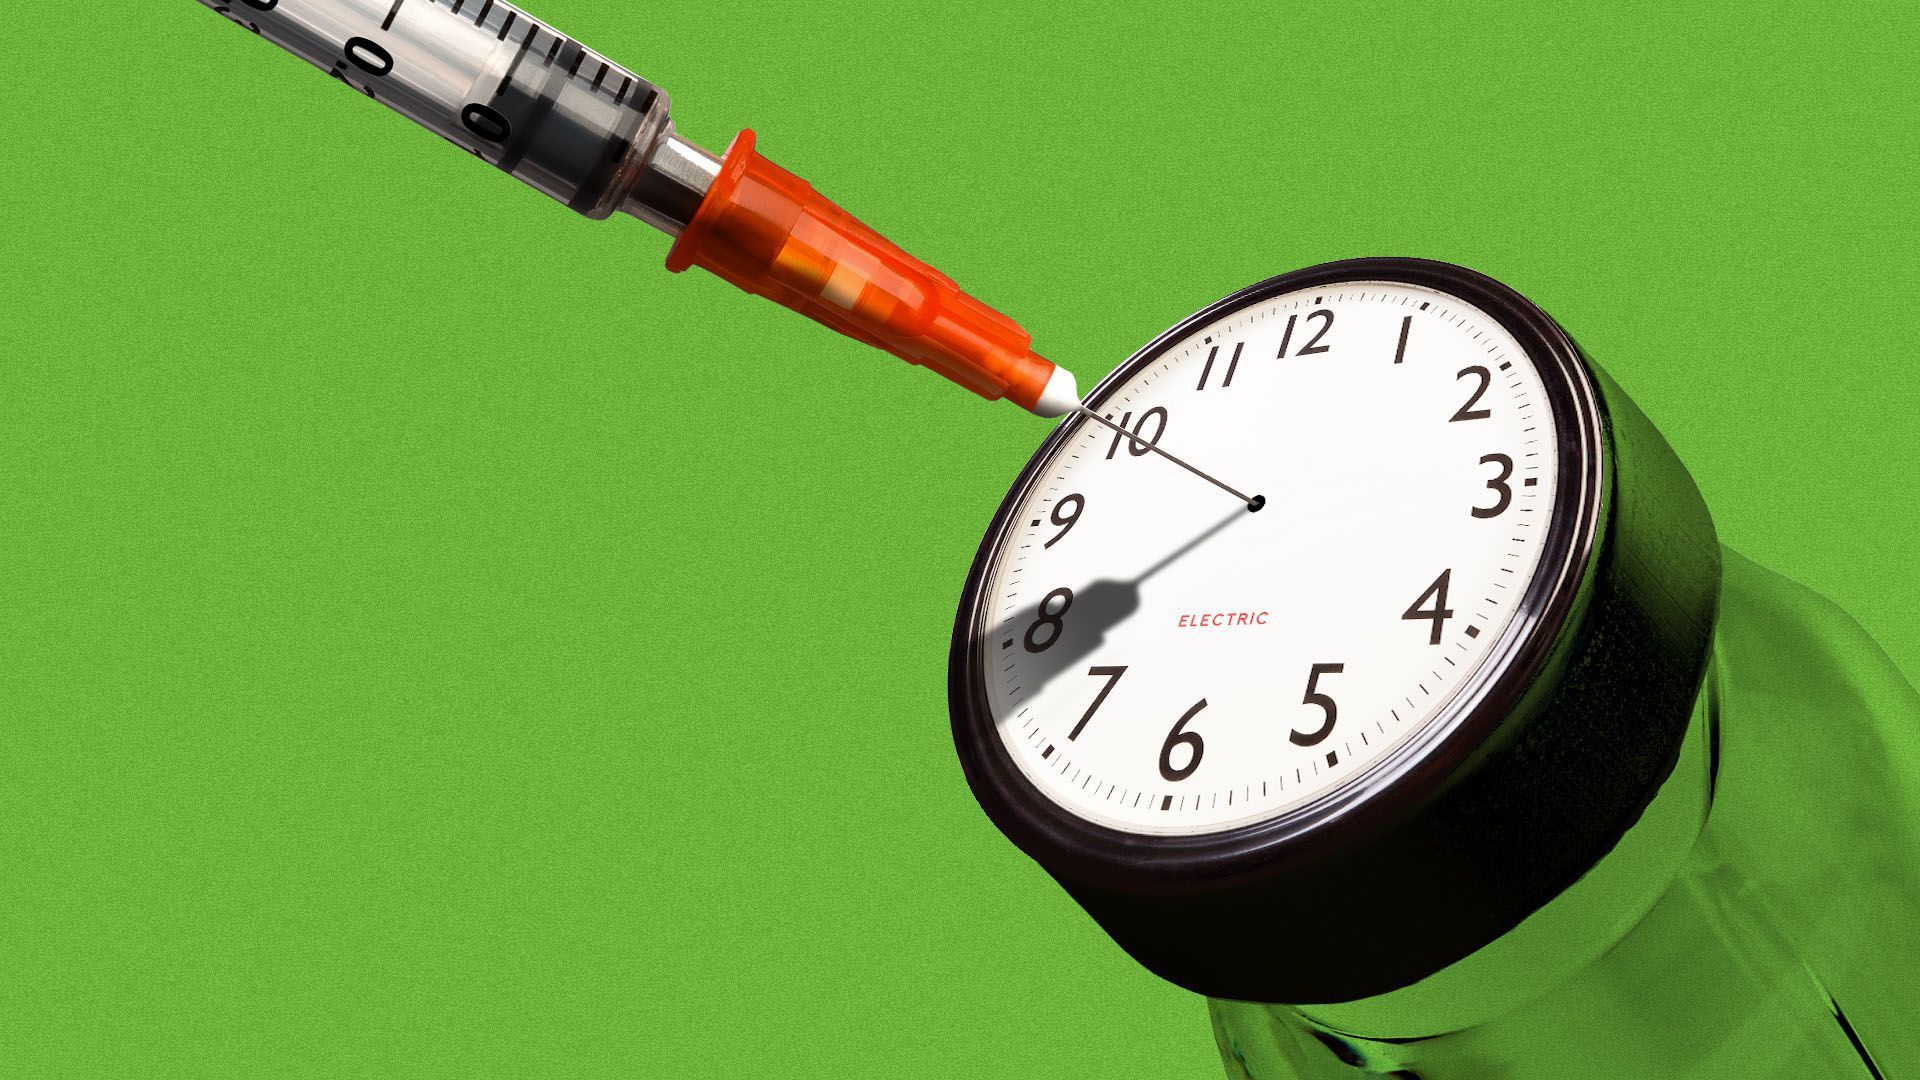 Illustration of a syringe in a bottle of insulin with a clock face cap.